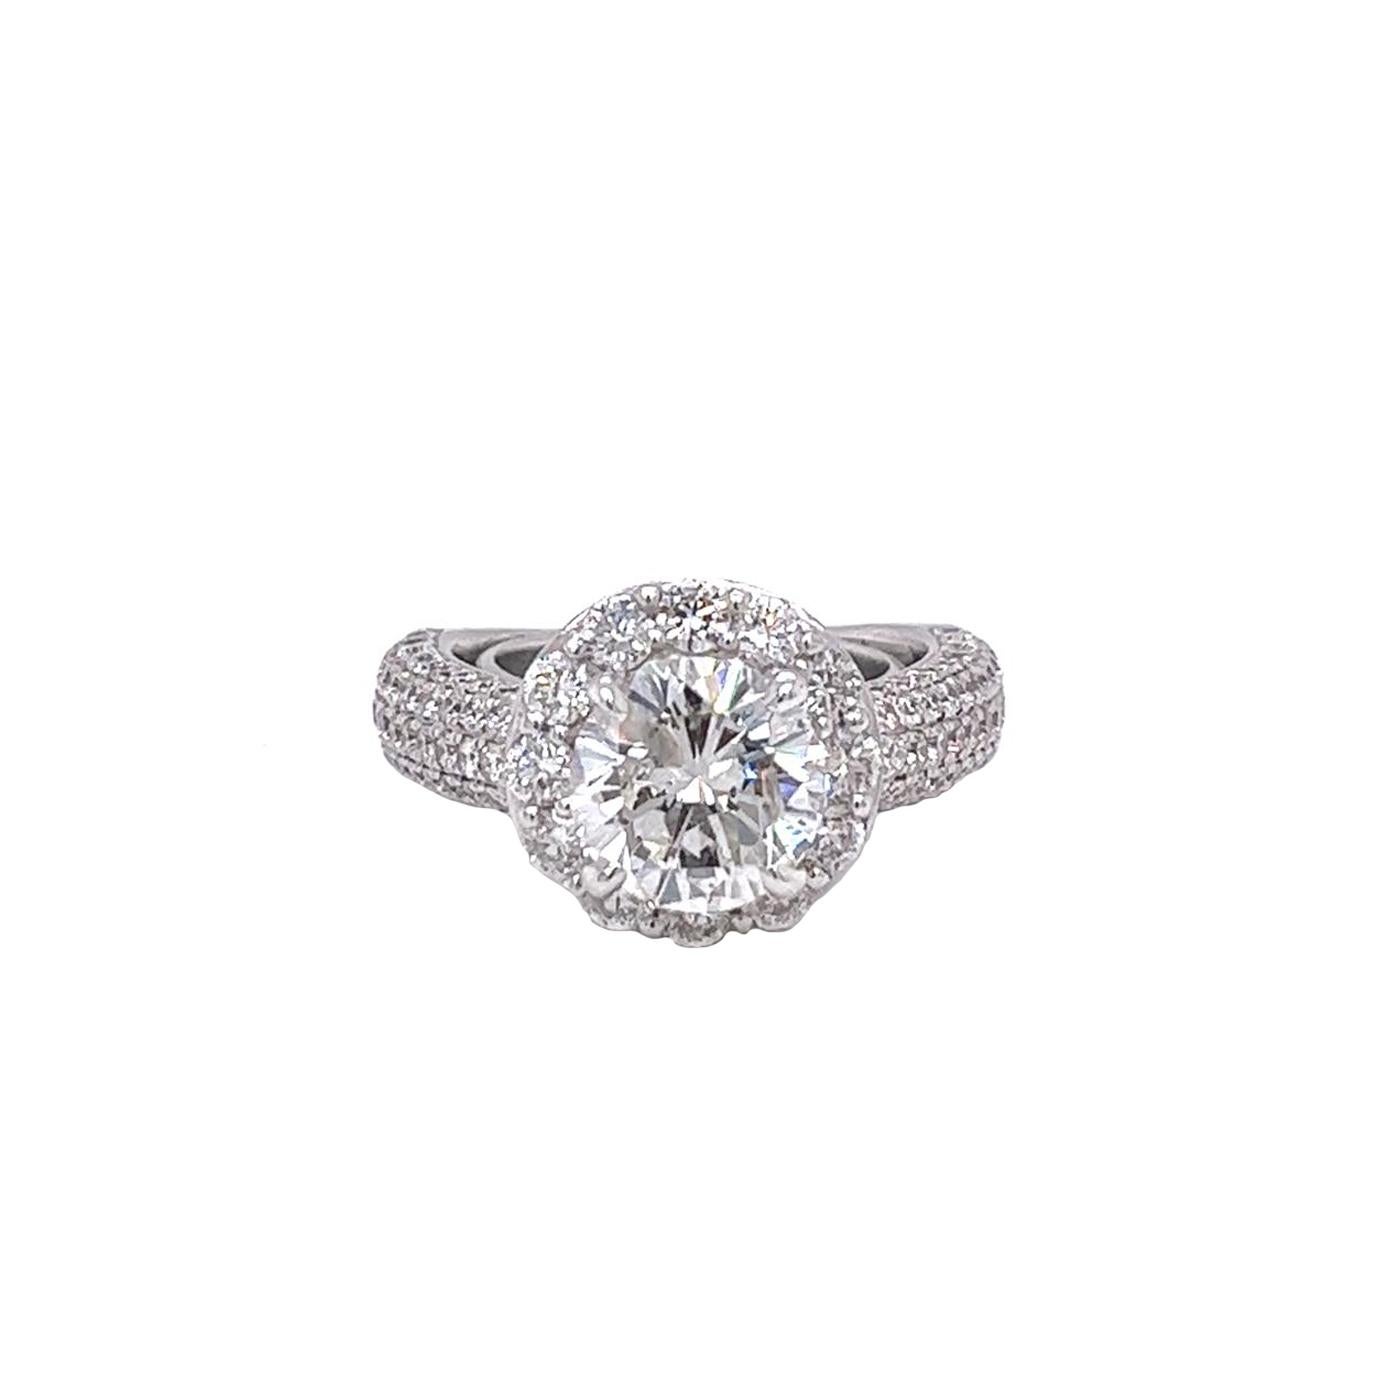 A classic natural diamond engagement ring showcasing a 2.56-carat round-shape cut diamond, H Color, and Si3 in Clarity. Finely Made with 18K White Gold. with 0.75-carat pave round diamonds that feature G color and VS1 clarity. This piece represents